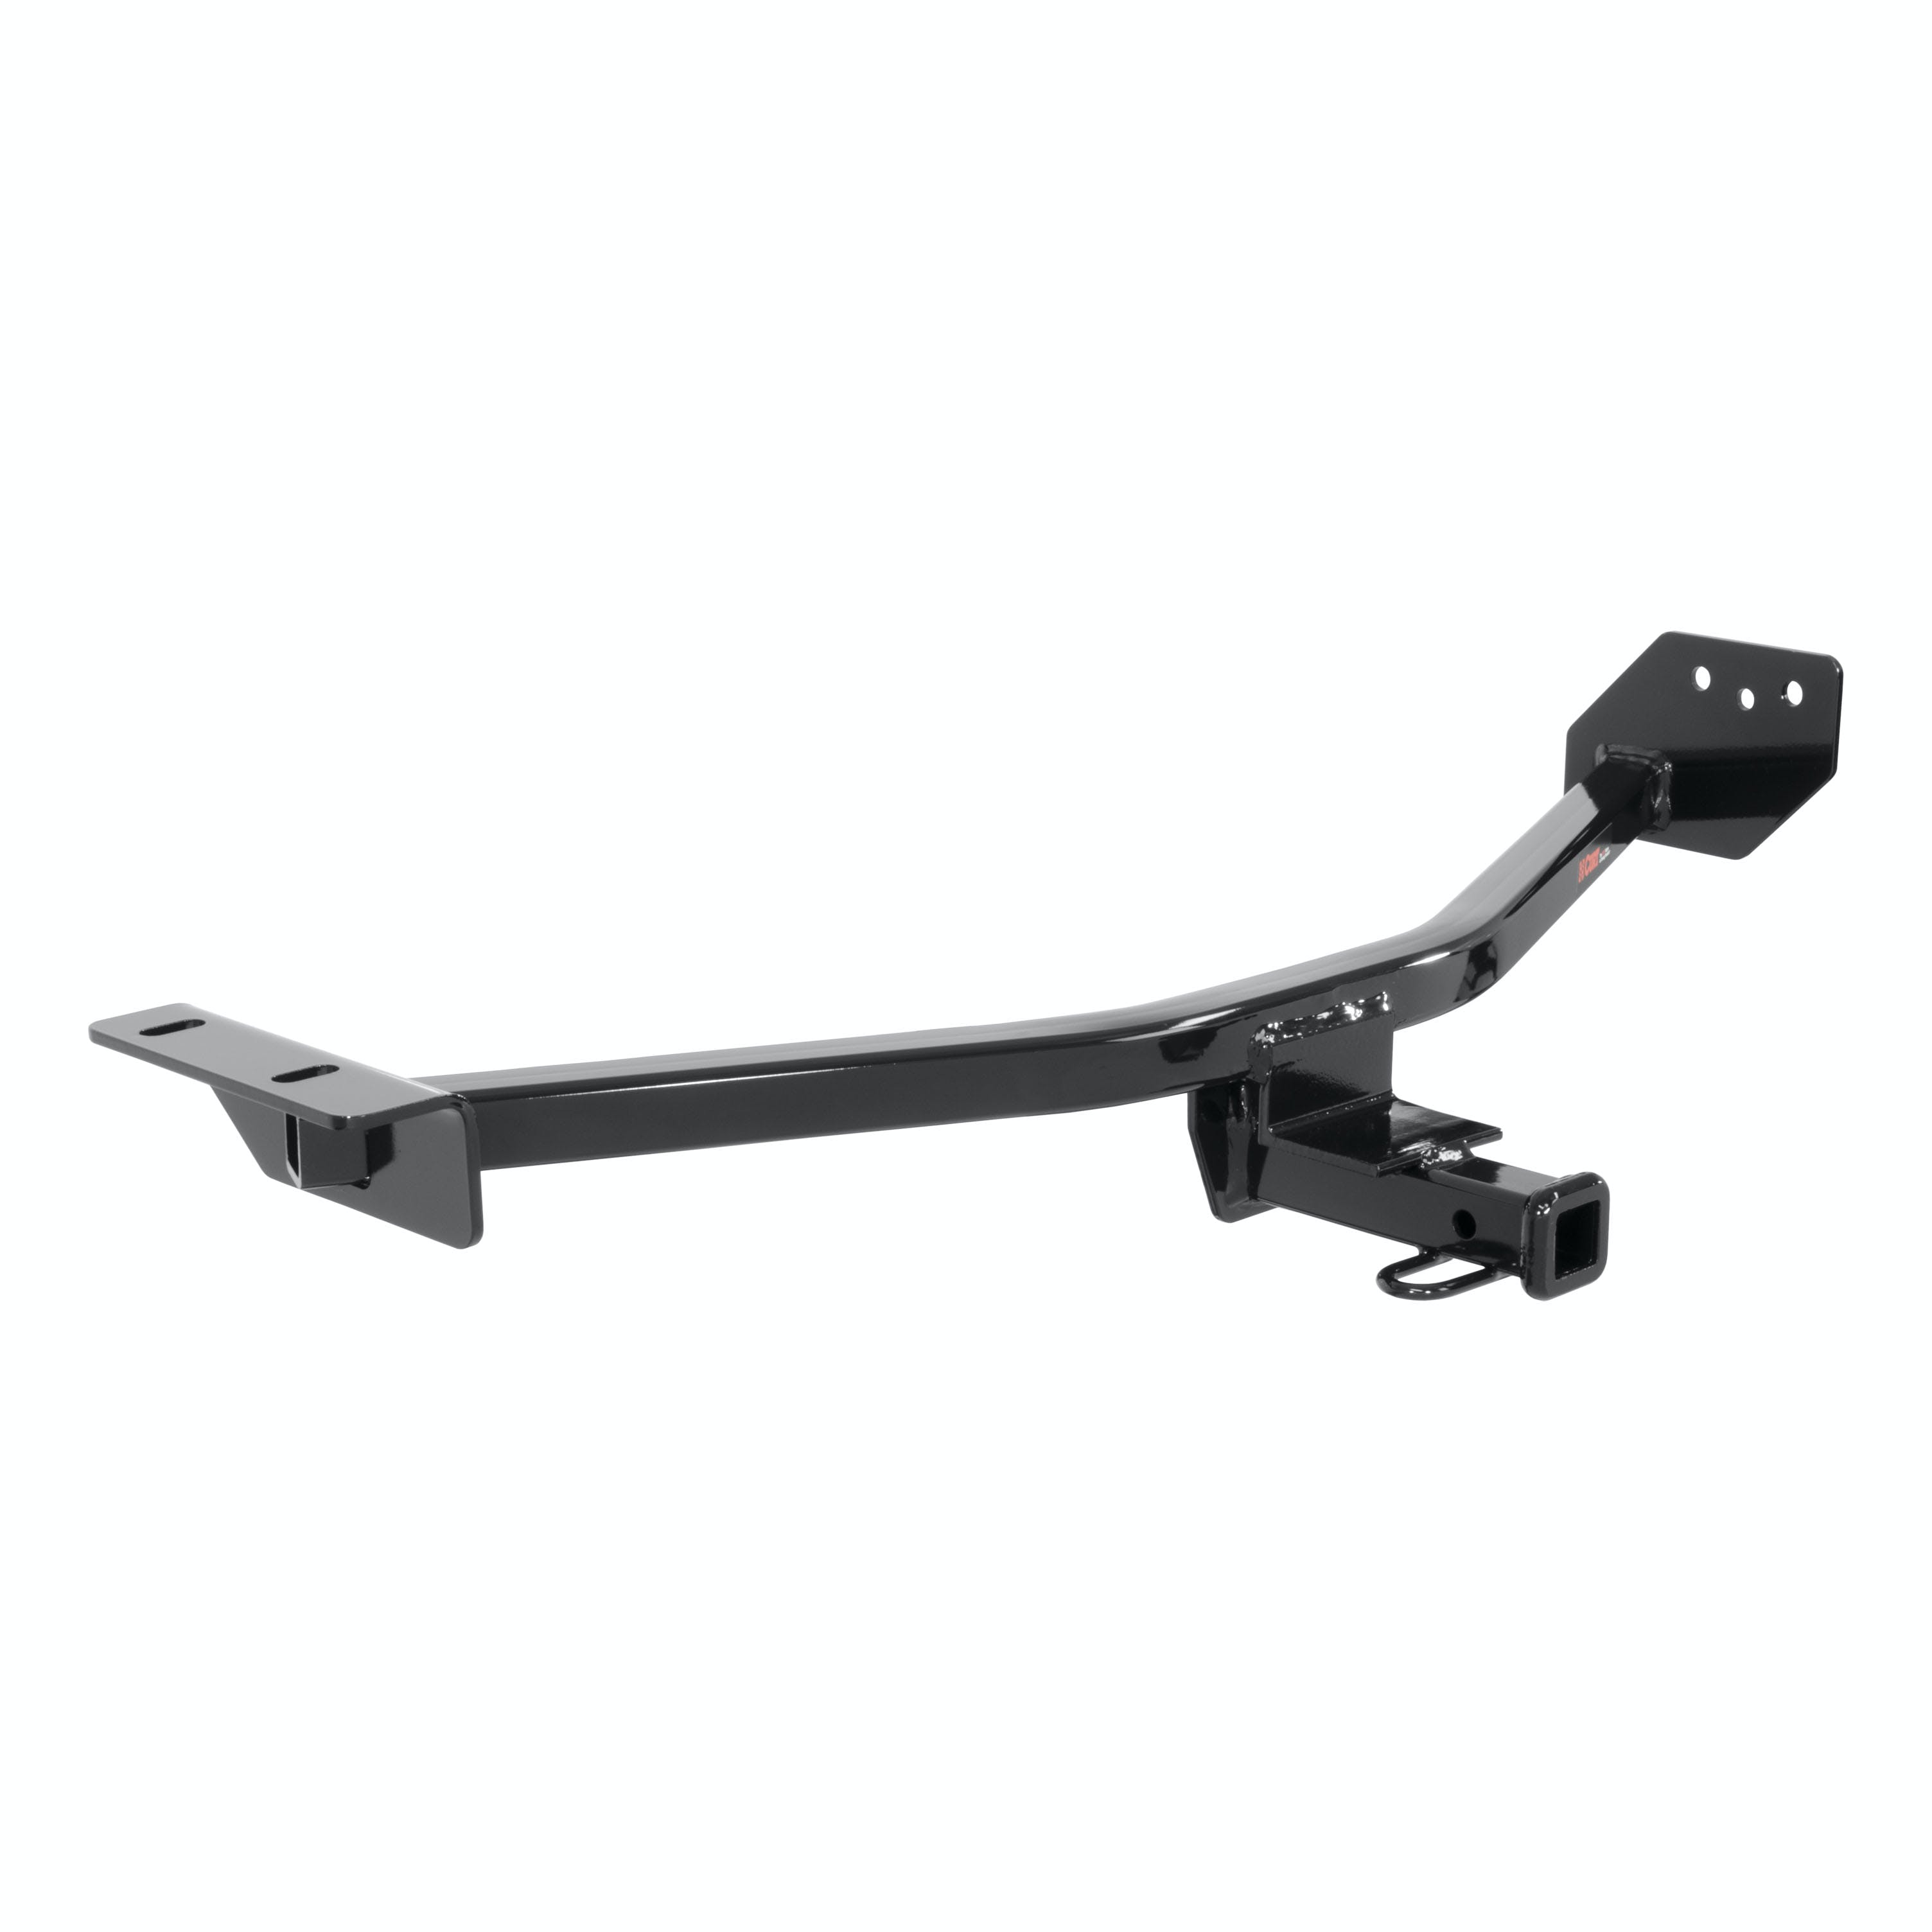 CURT 11396 Class 1 Trailer Hitch, 1-1/4 Receiver, Select Nissan Leaf